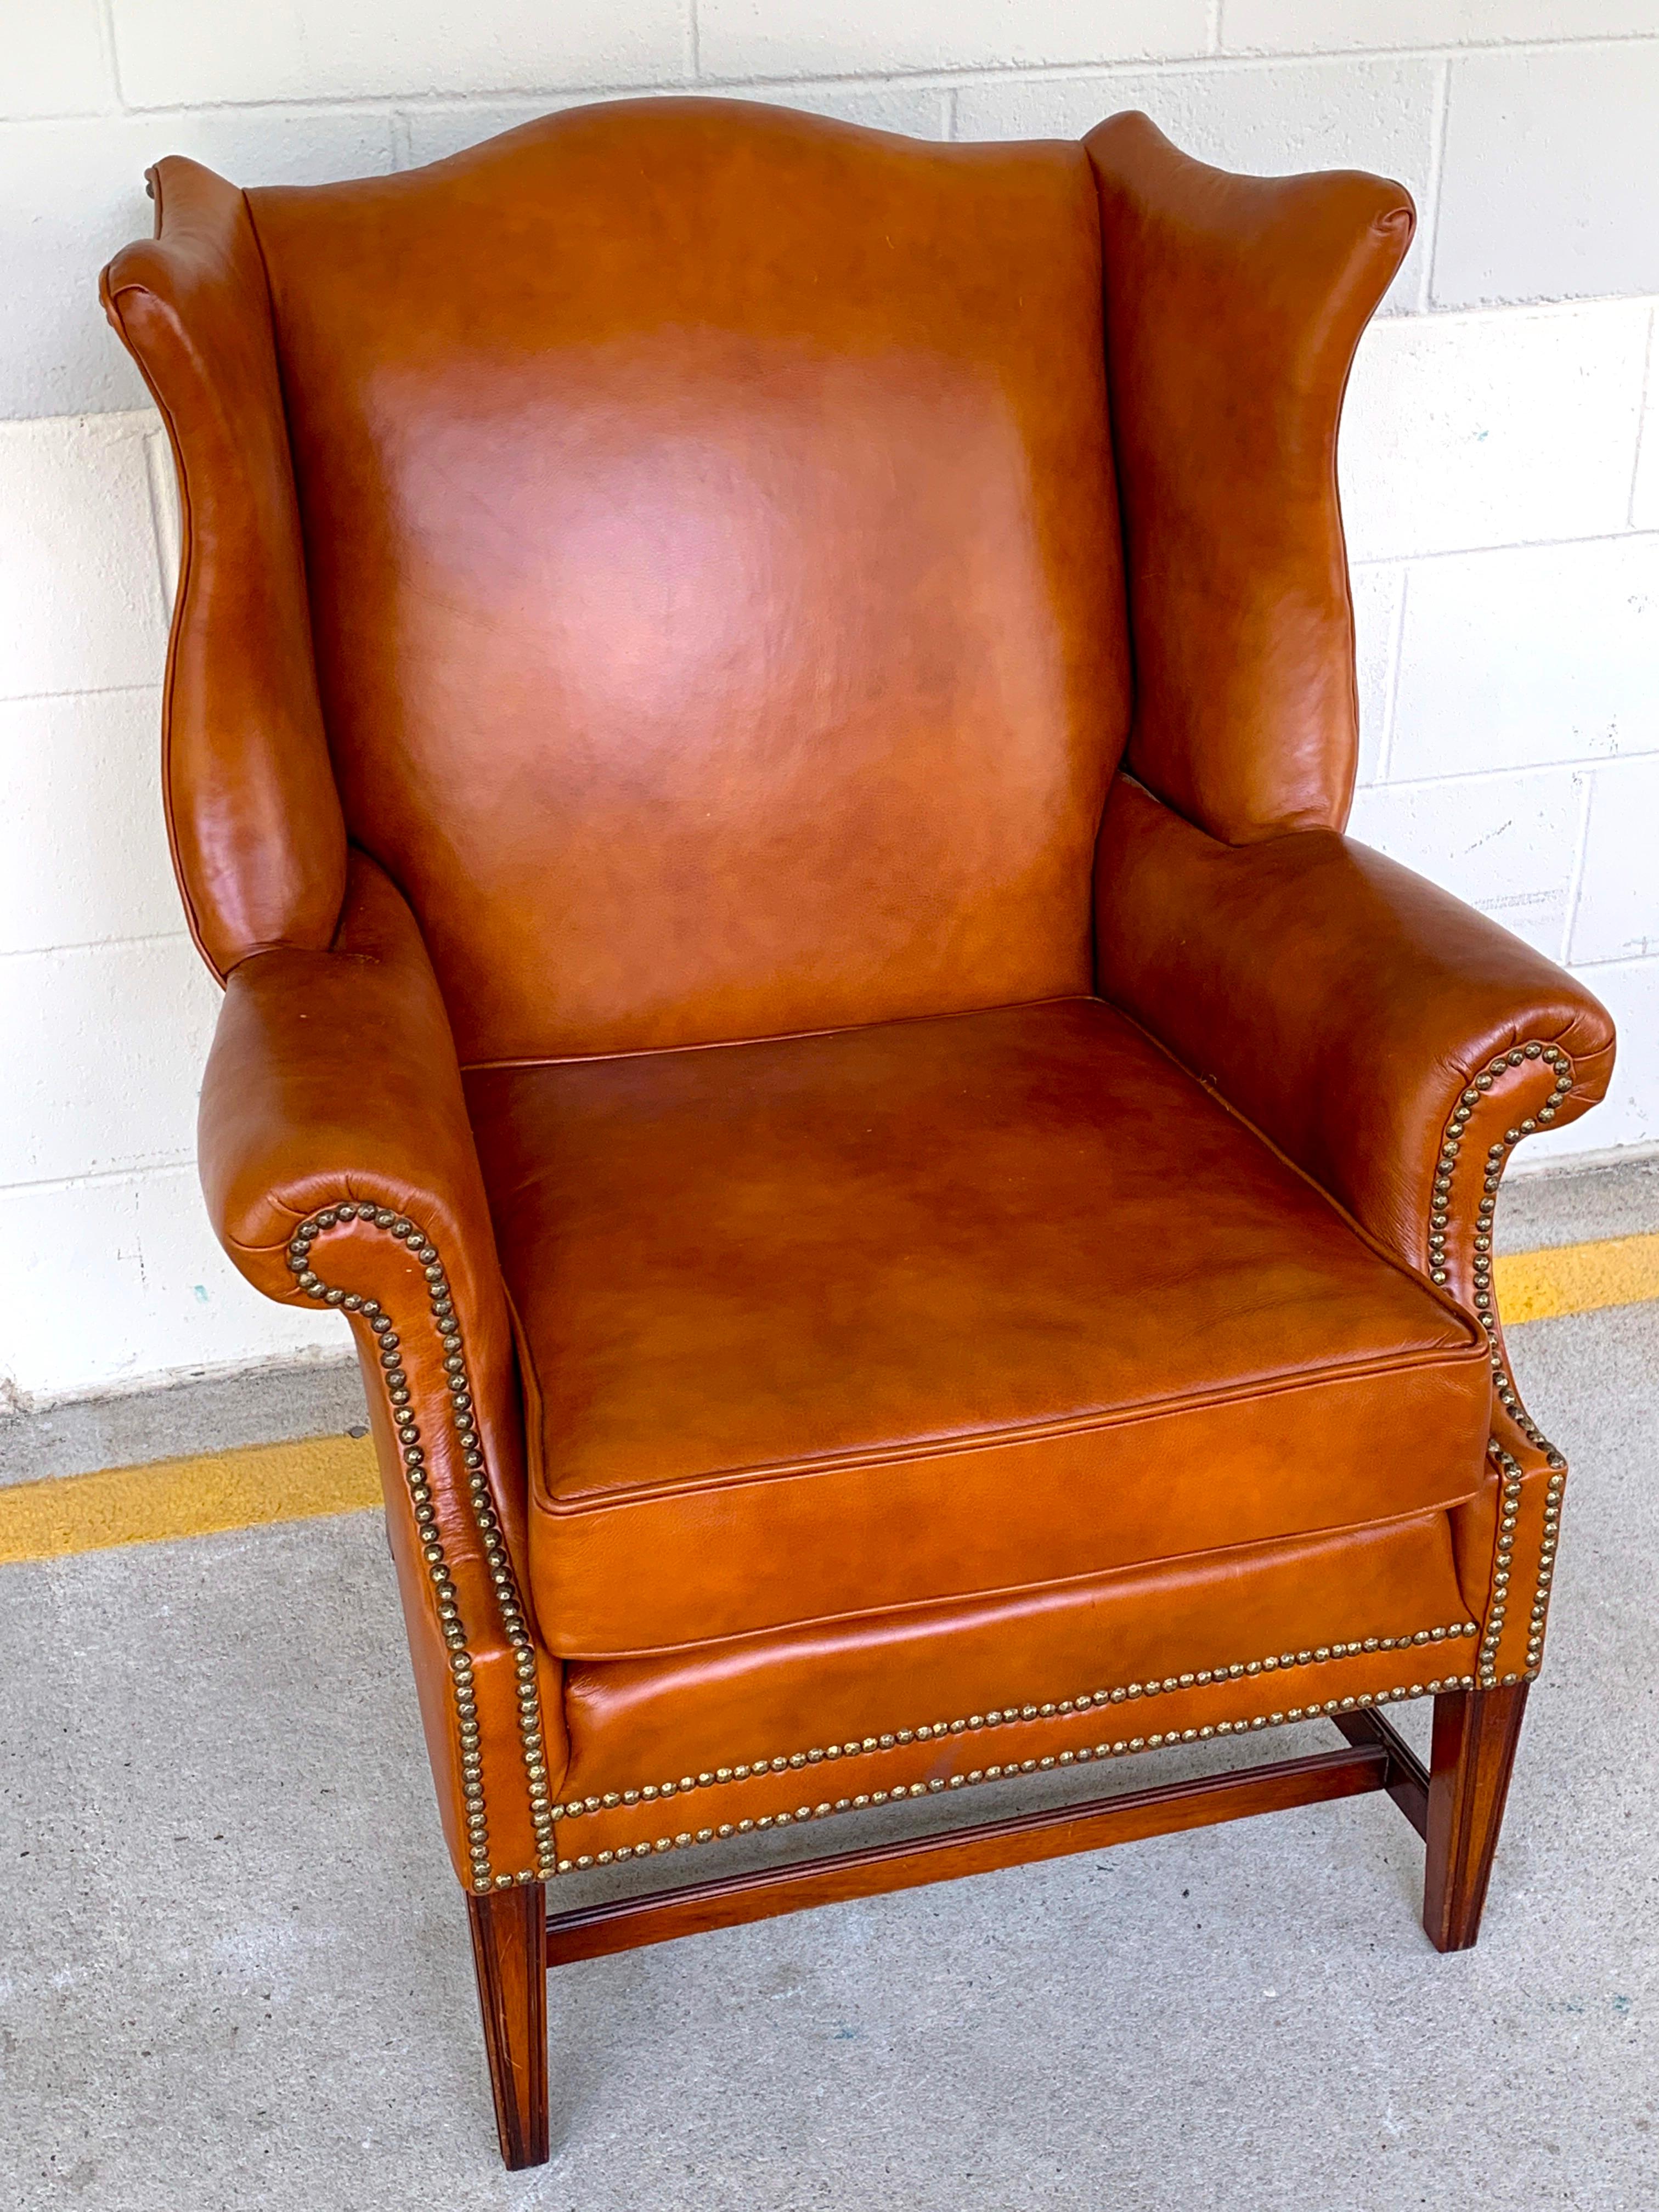 English saddle leather mahogany wingback chair, beautifully shaped lush leather wing chair with brass nailheads, raised on a mahogany stretcher base.
Measures: Arm height 24